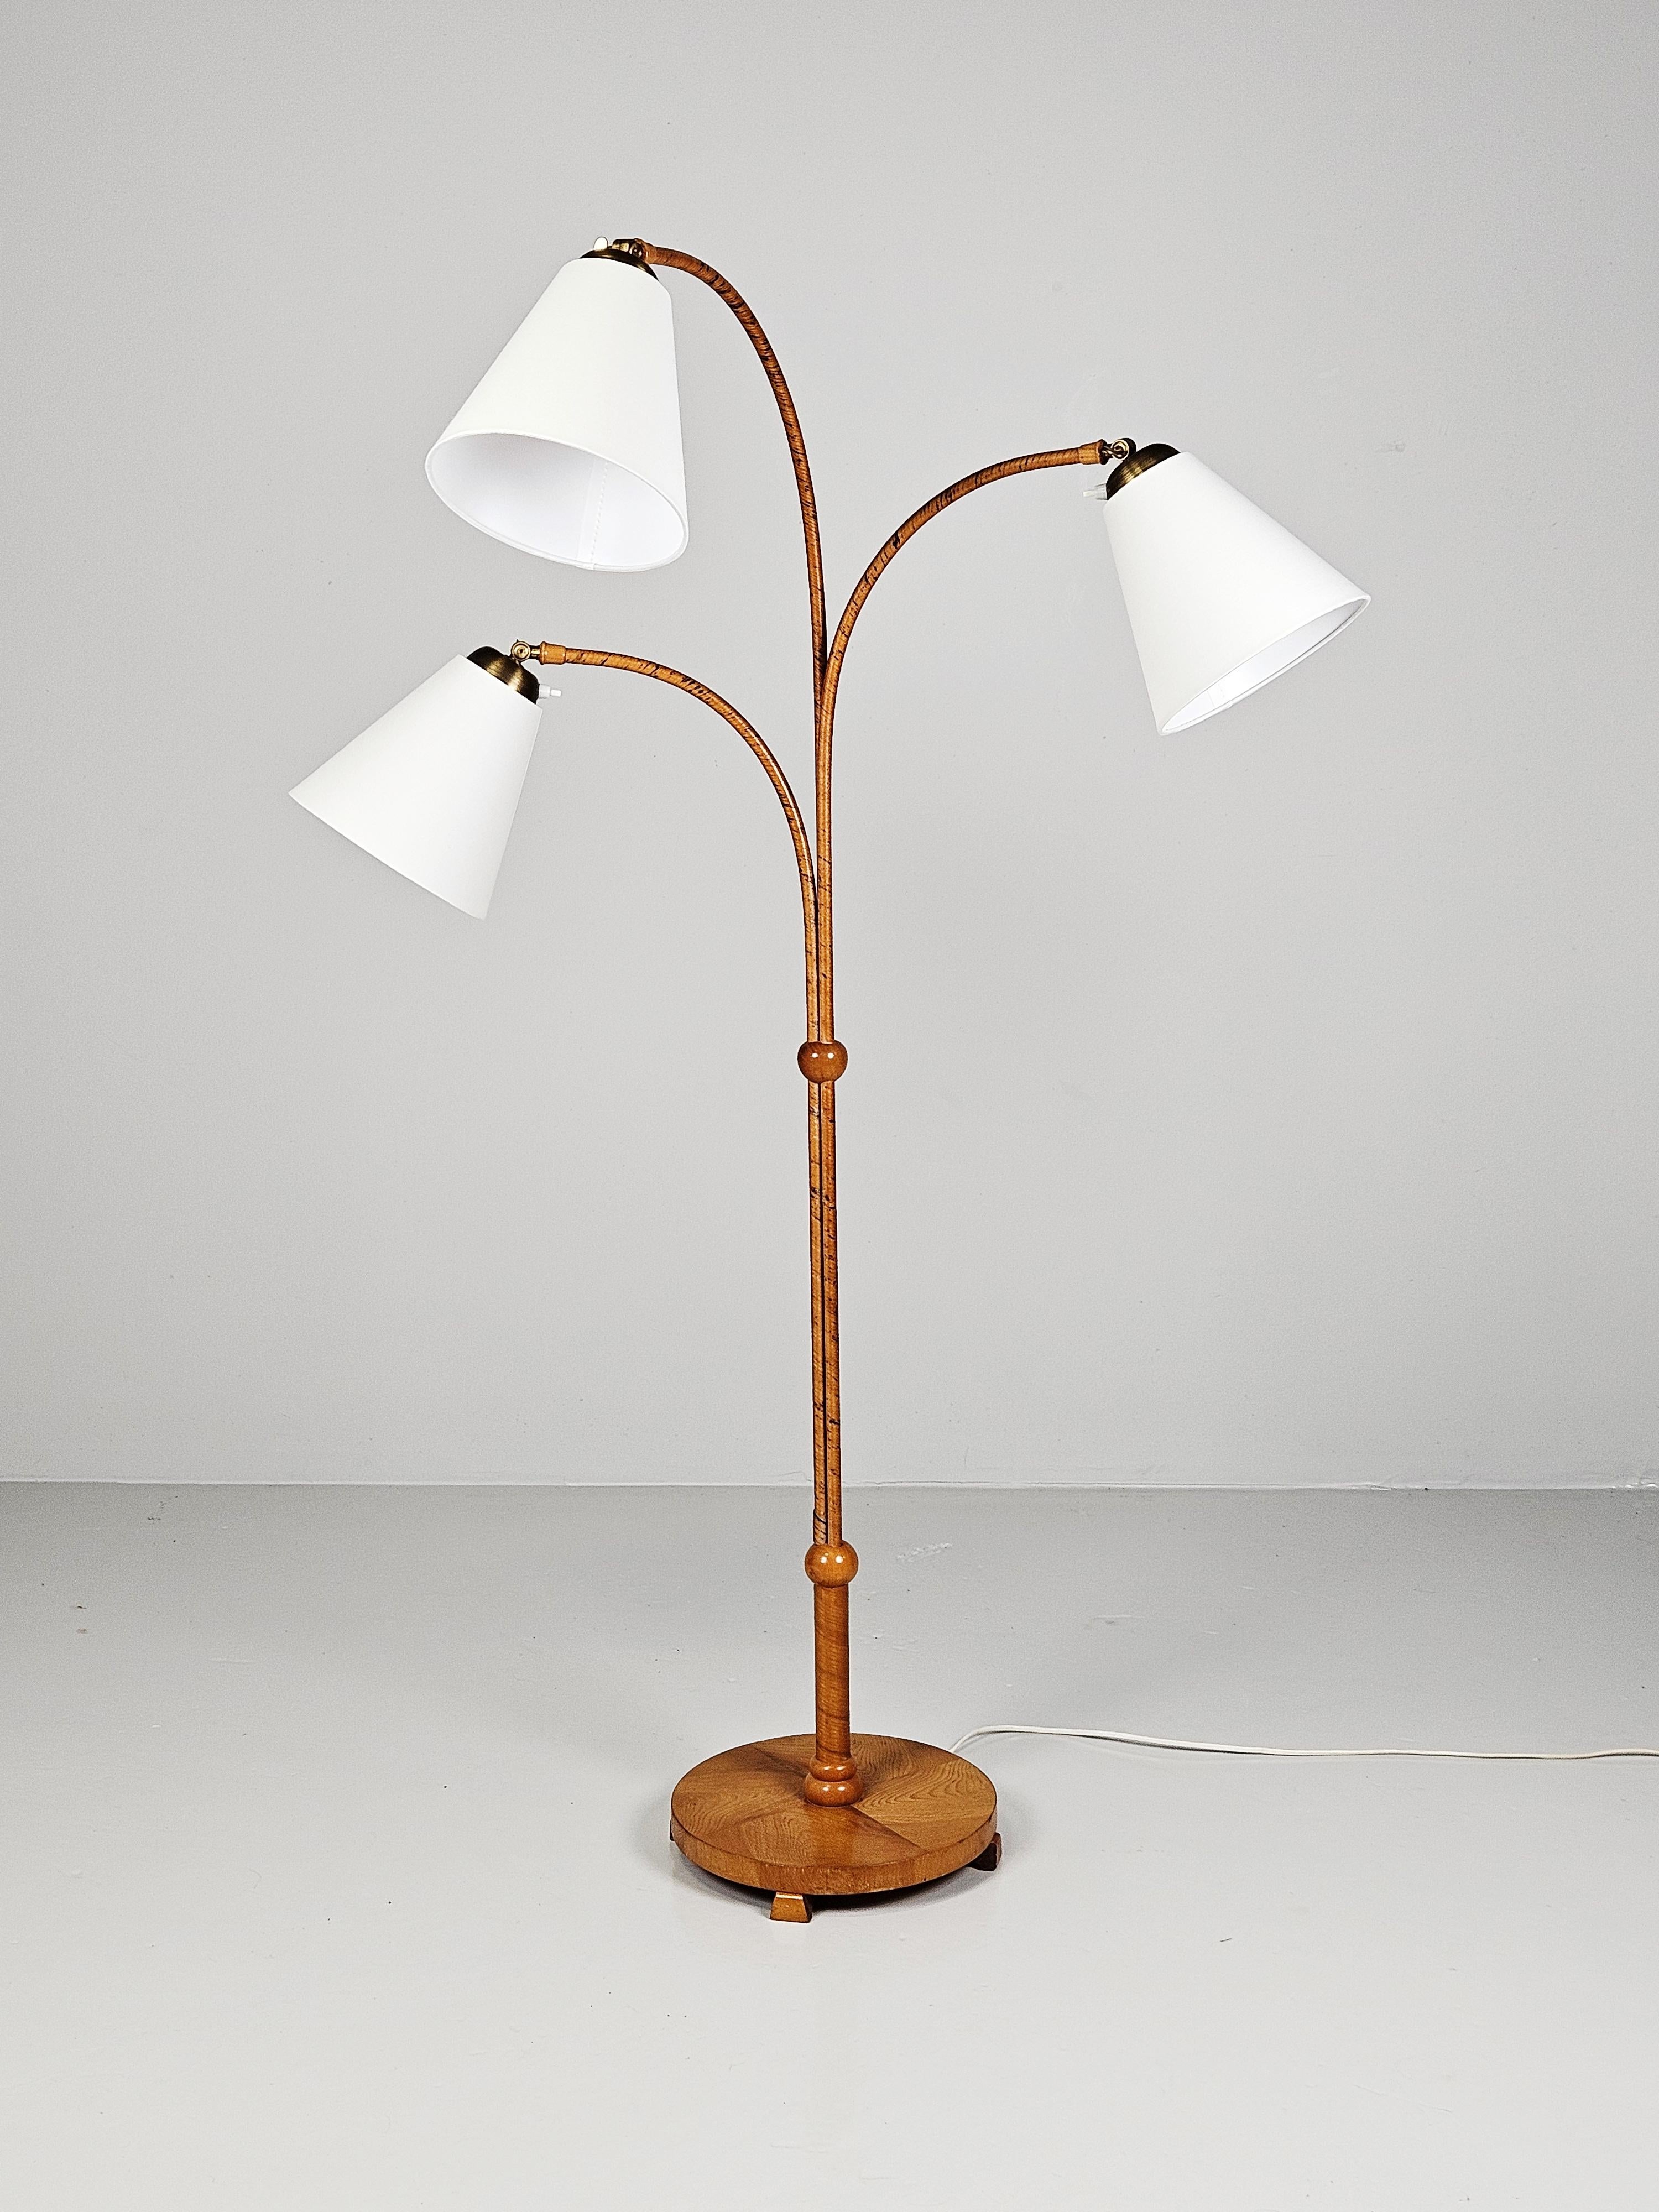 Rare Scandinavian modern floor lamp by anonymous designer. Made in Sweden during the 1940s.

Arms and neck wrapped in rattan with foot with veneer. Brass details.

Adjustable arms.